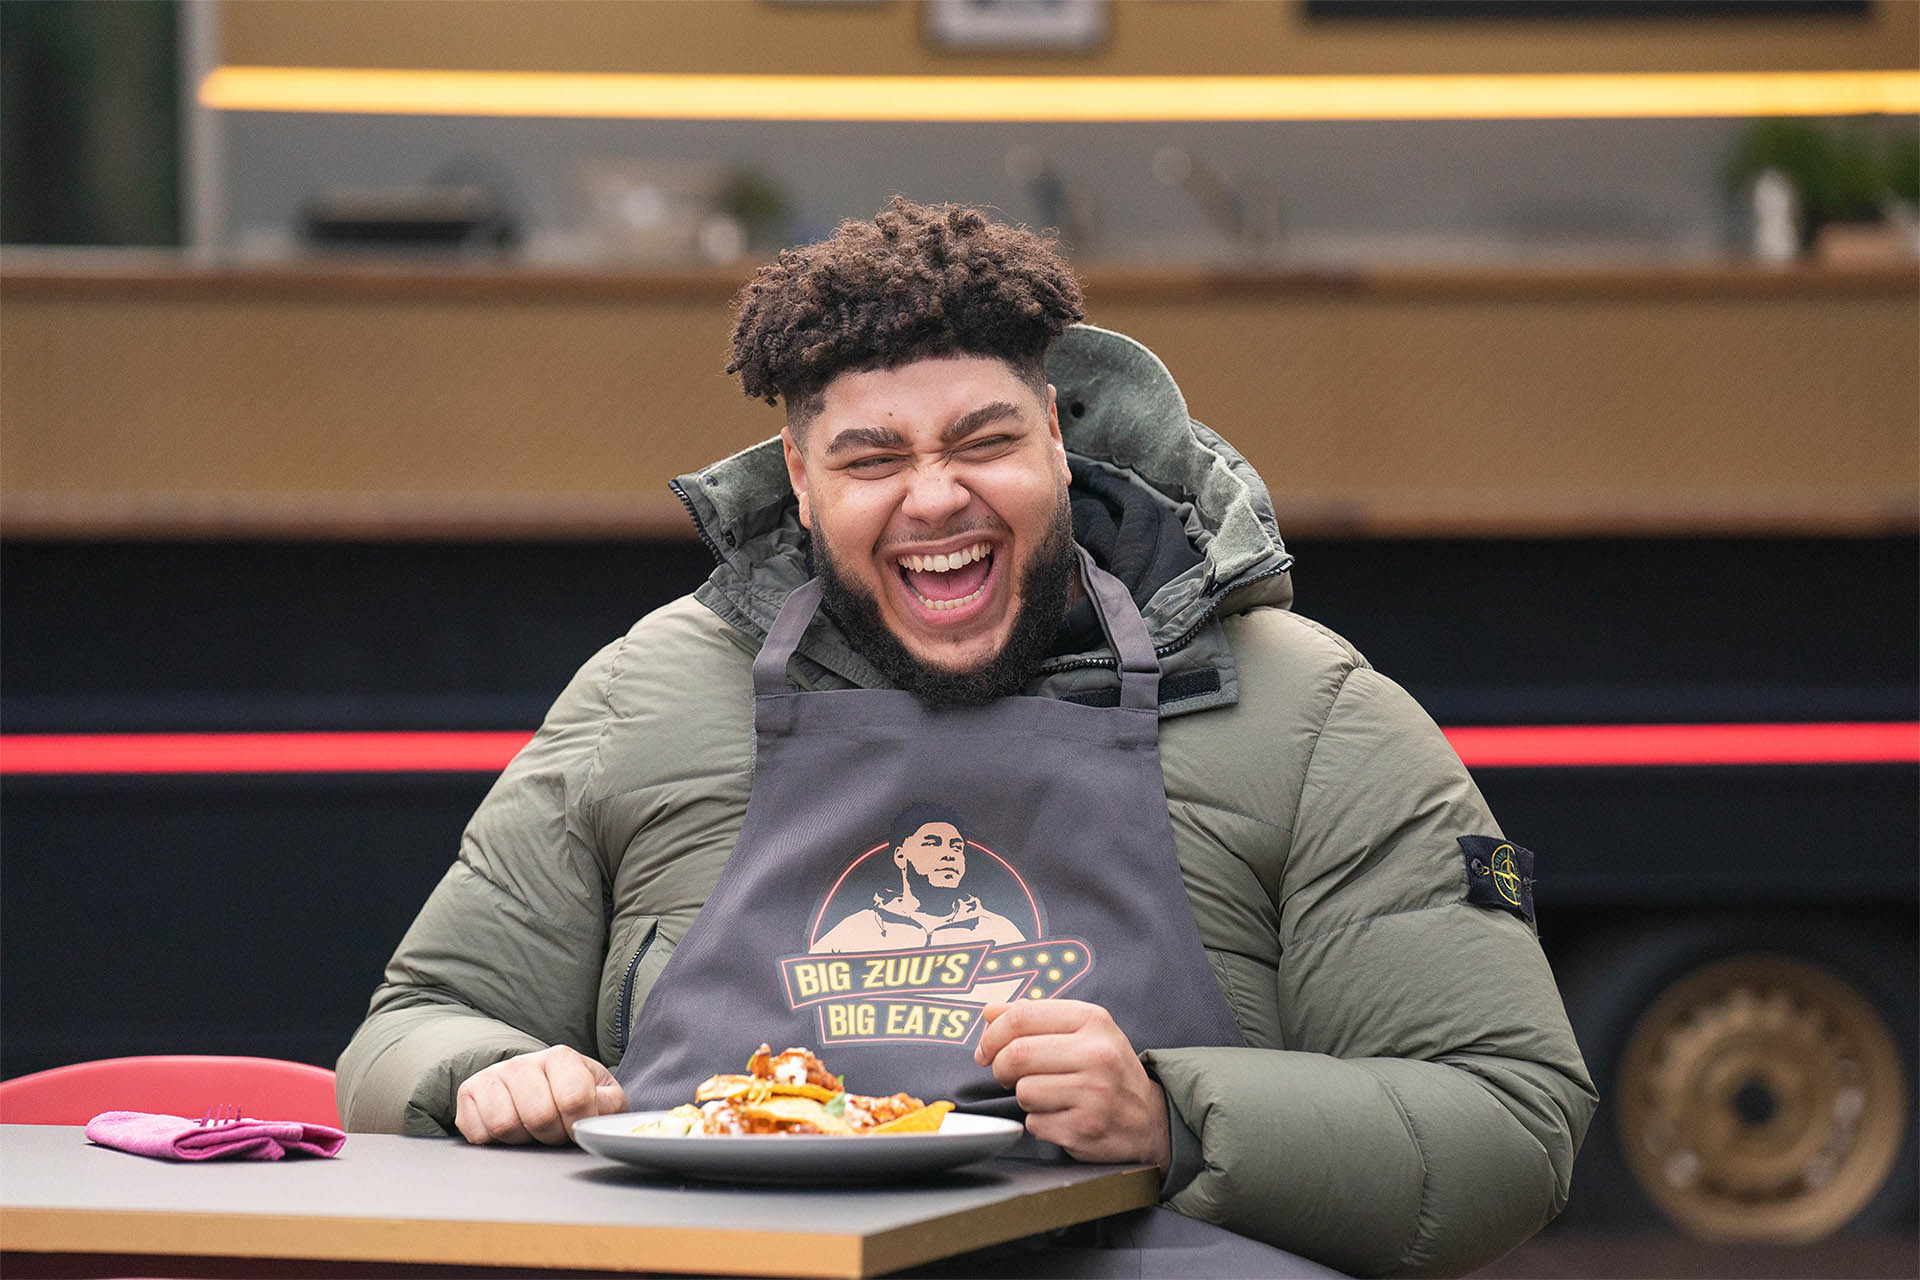 Big Zuu laughing outside his food truck while tucking into a plate of his food